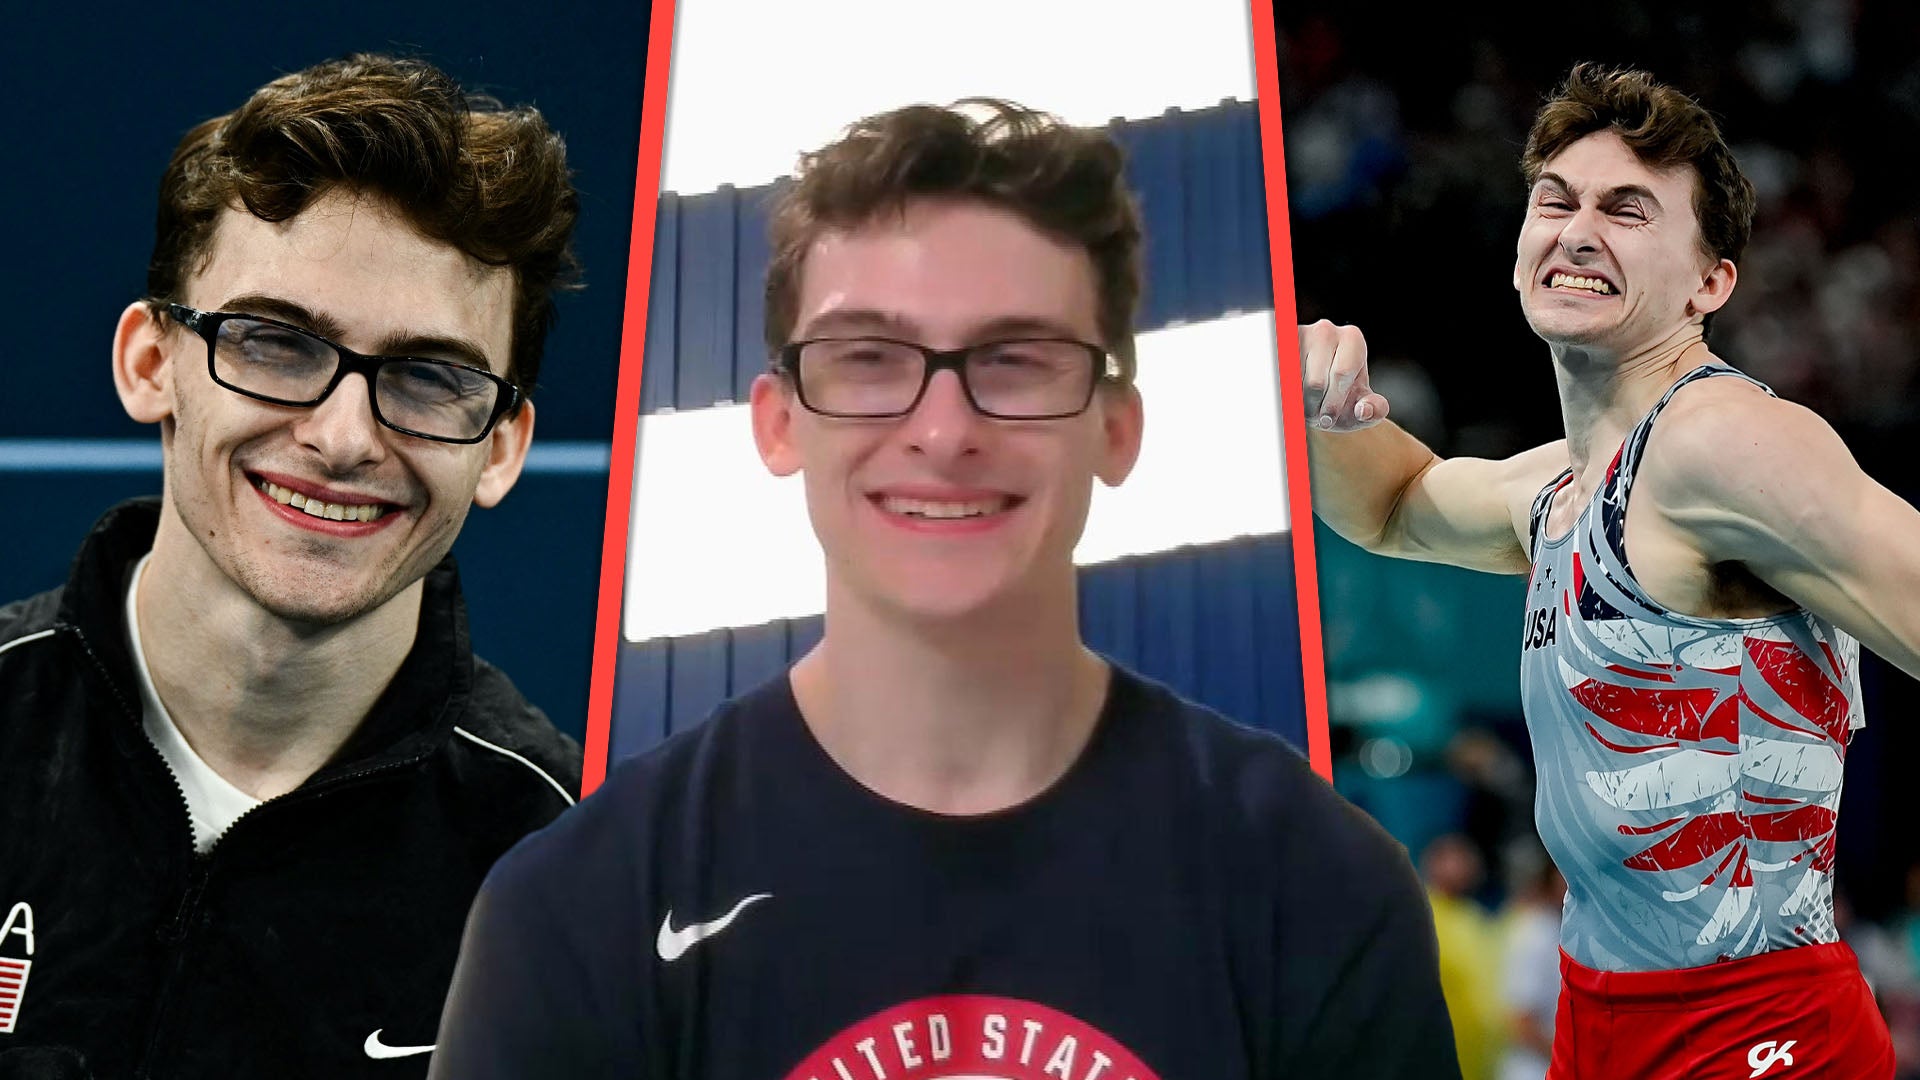 Team USA's Stephen Nedoroscik Reacts to Being Dubbed the 'Clark Kent' of Gymnastics (Exclusive)